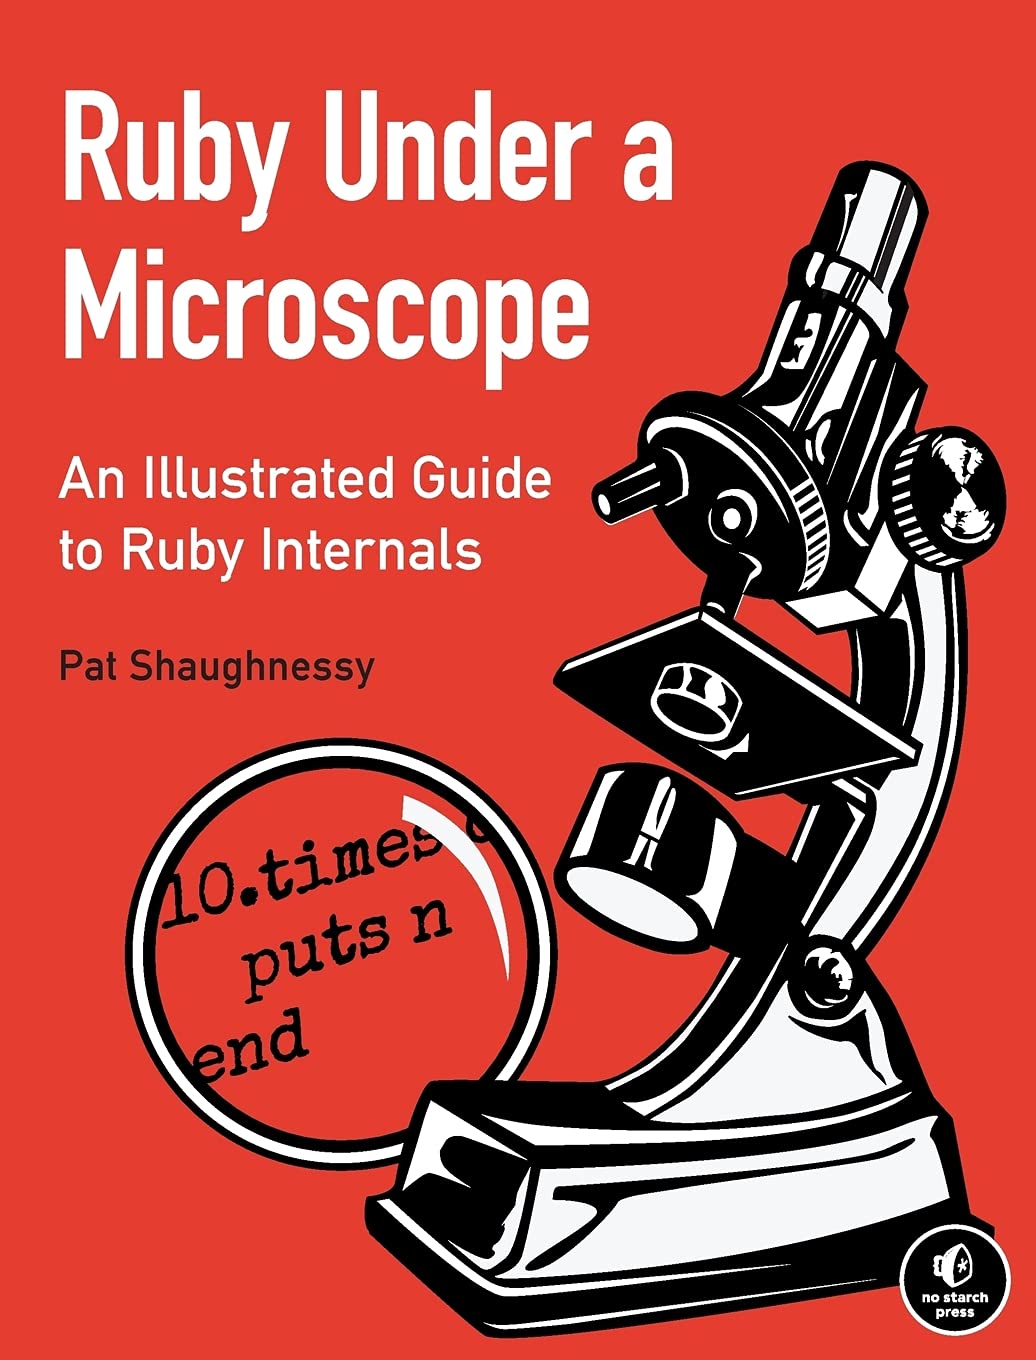 Pat Shaughnessy: Ruby under a microscope (2014)